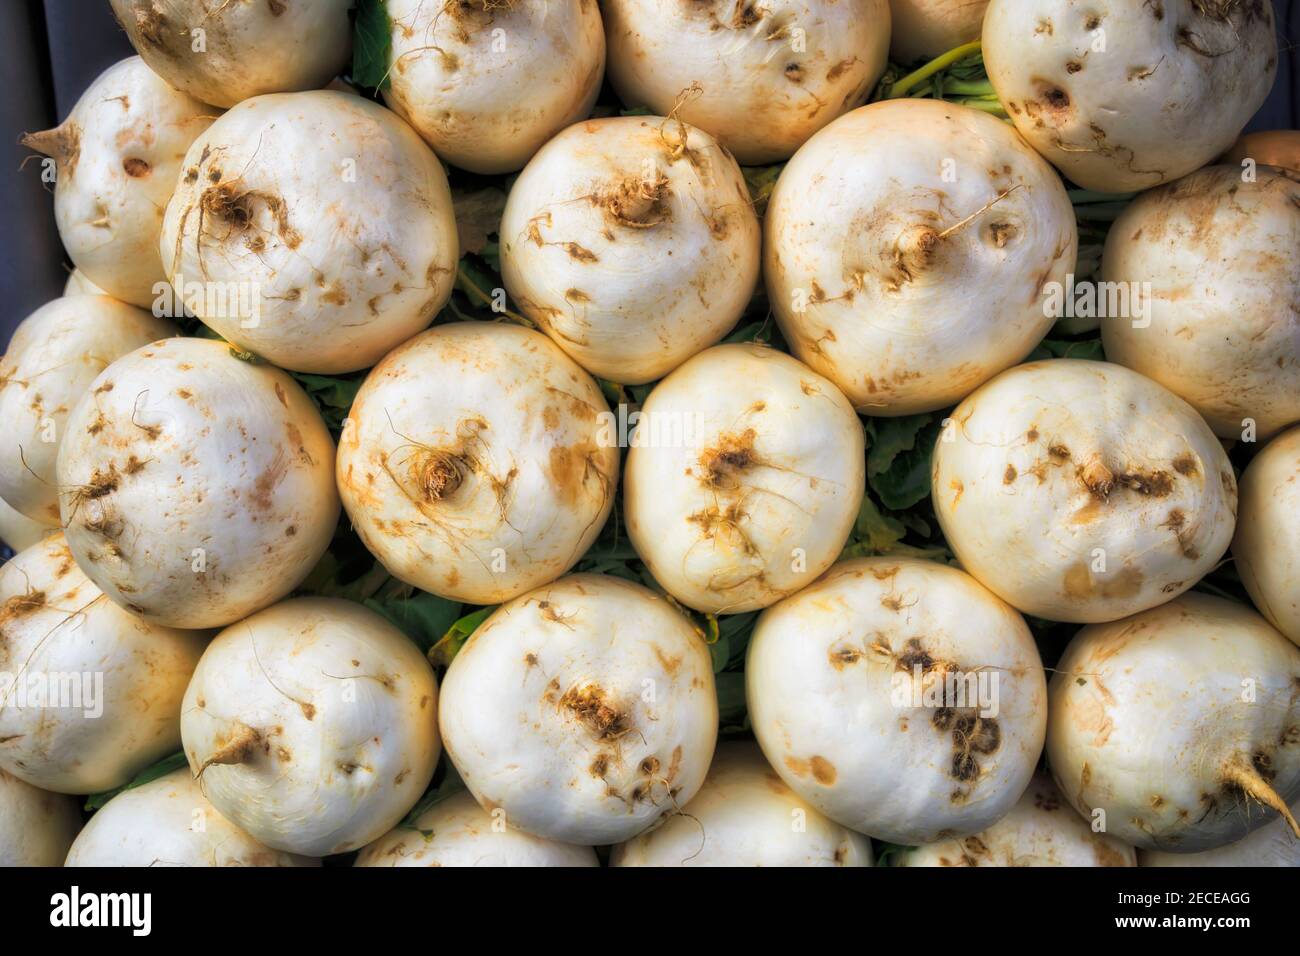 WHite round roots of radish vegetable grown in Japan - traditional diet for island nation. Stock Photo